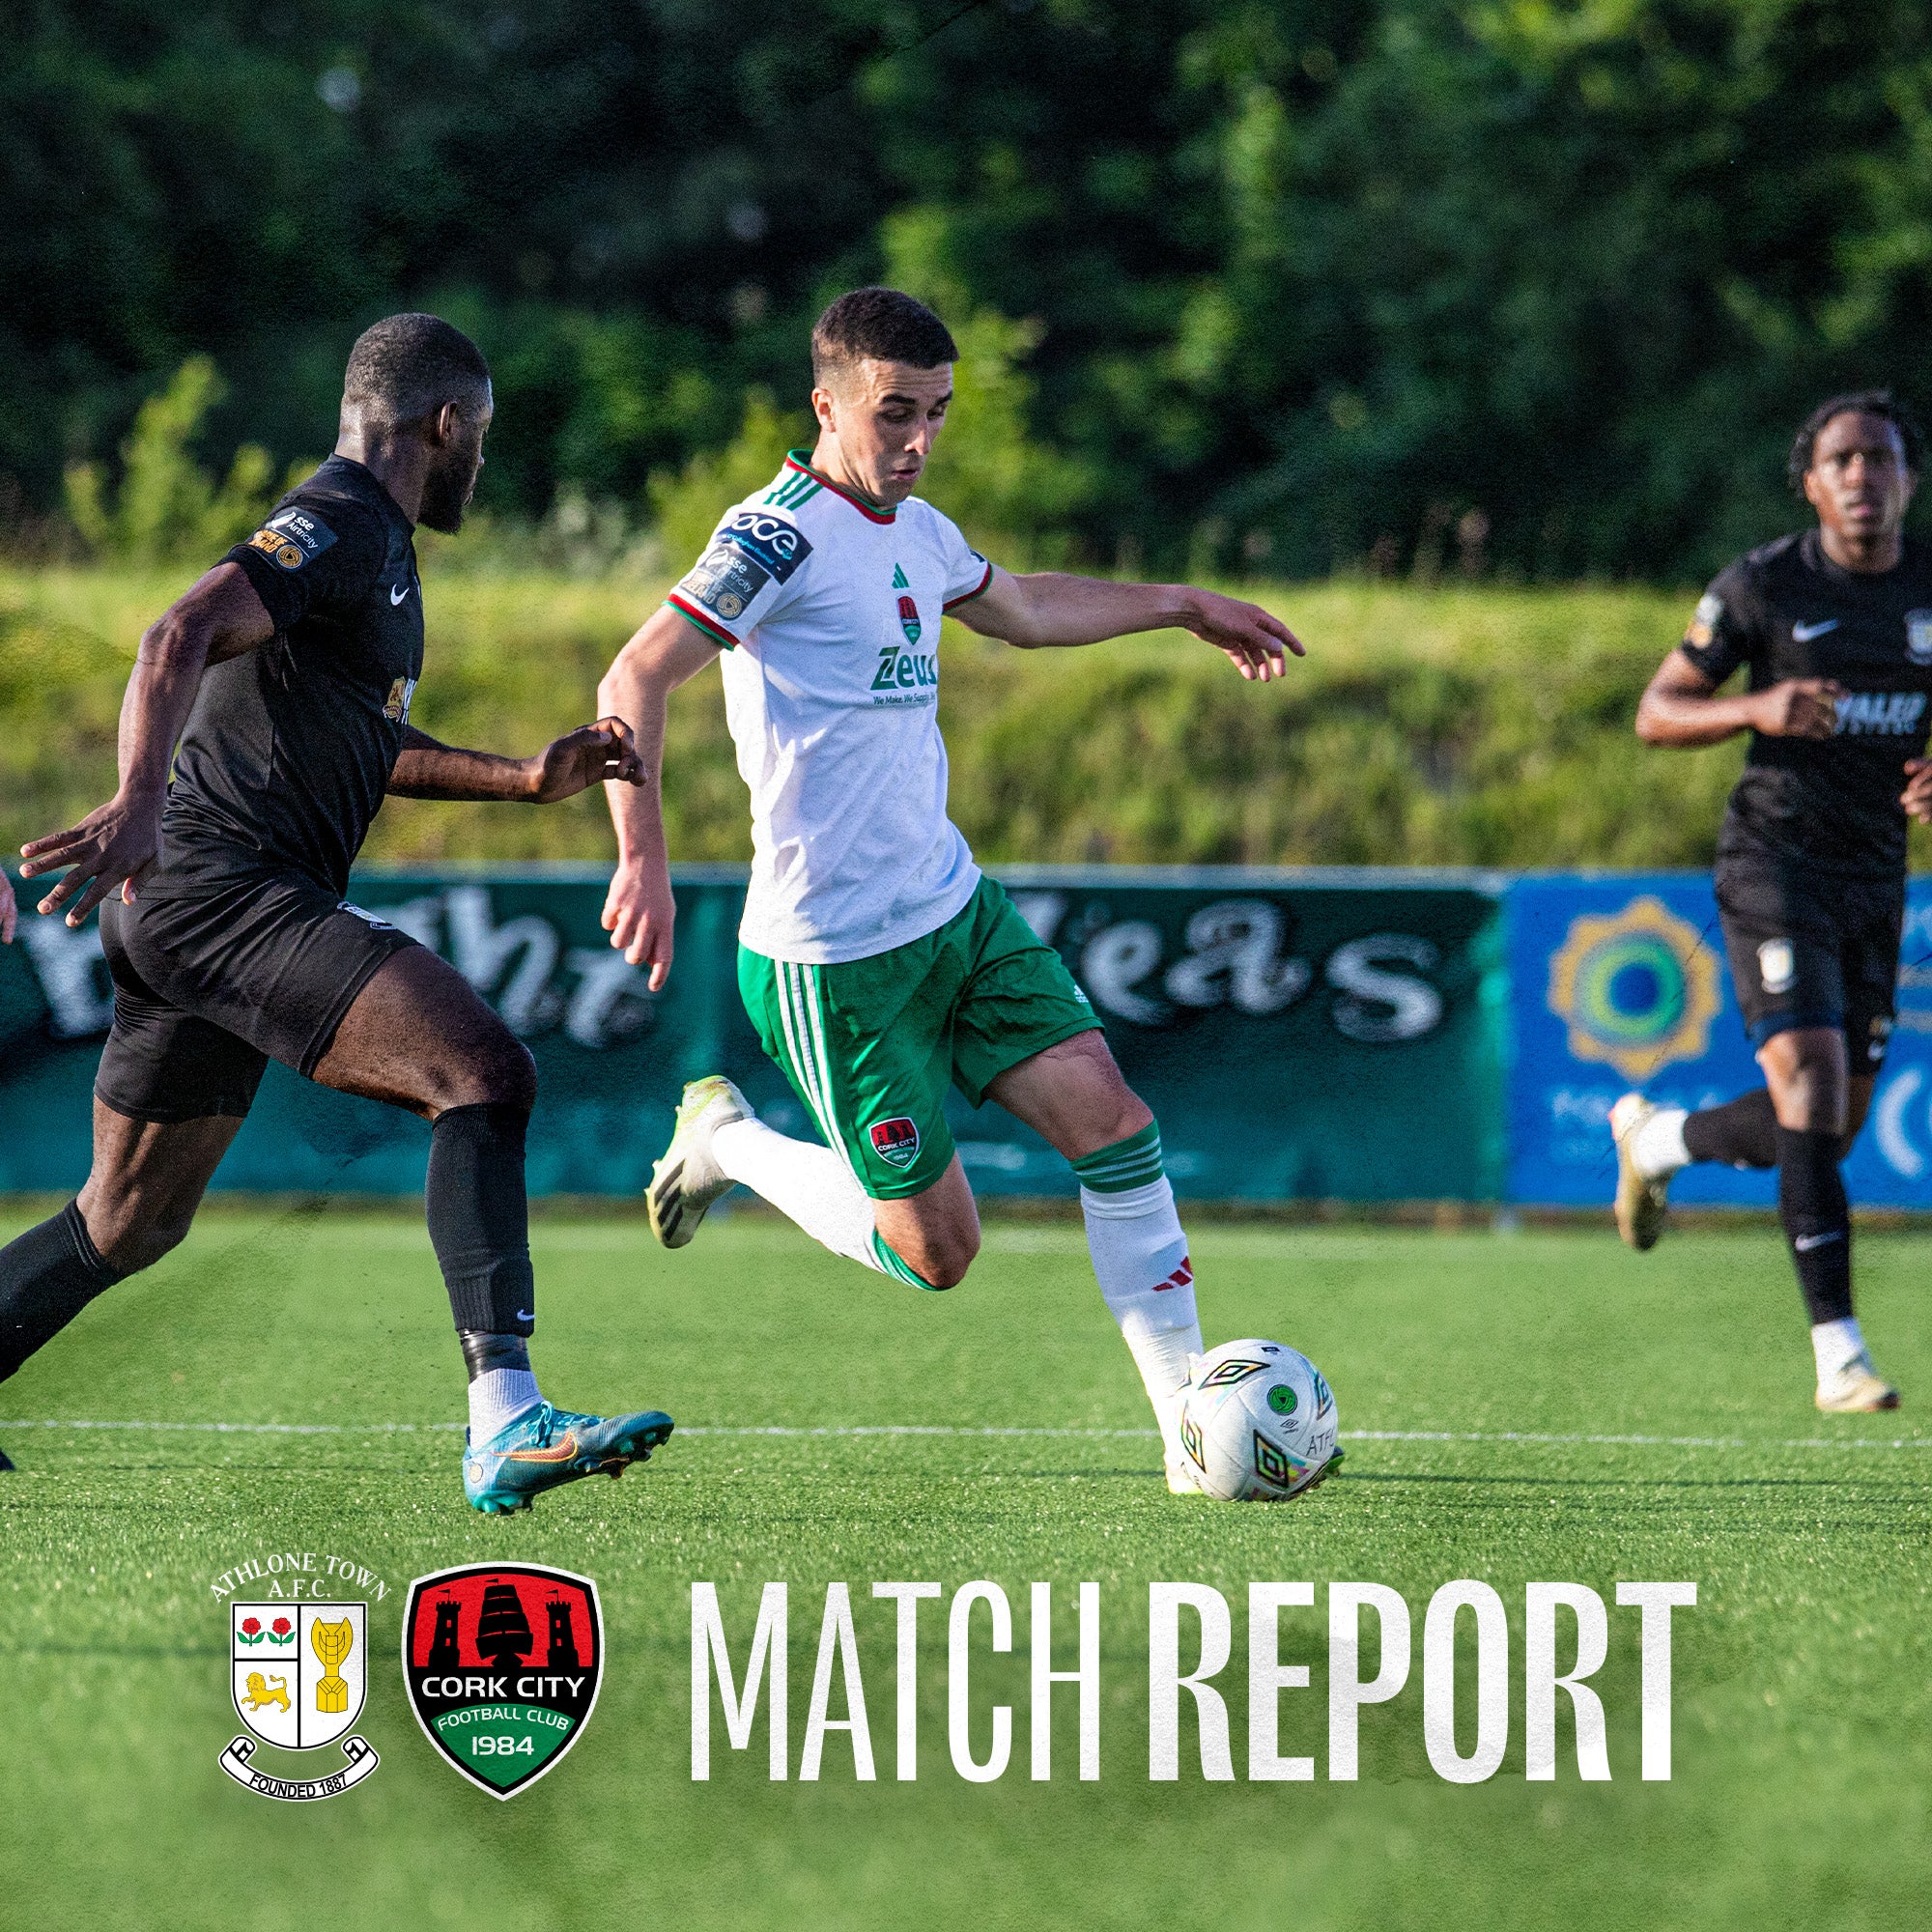 Match Report: Athlone Town 1-0 City